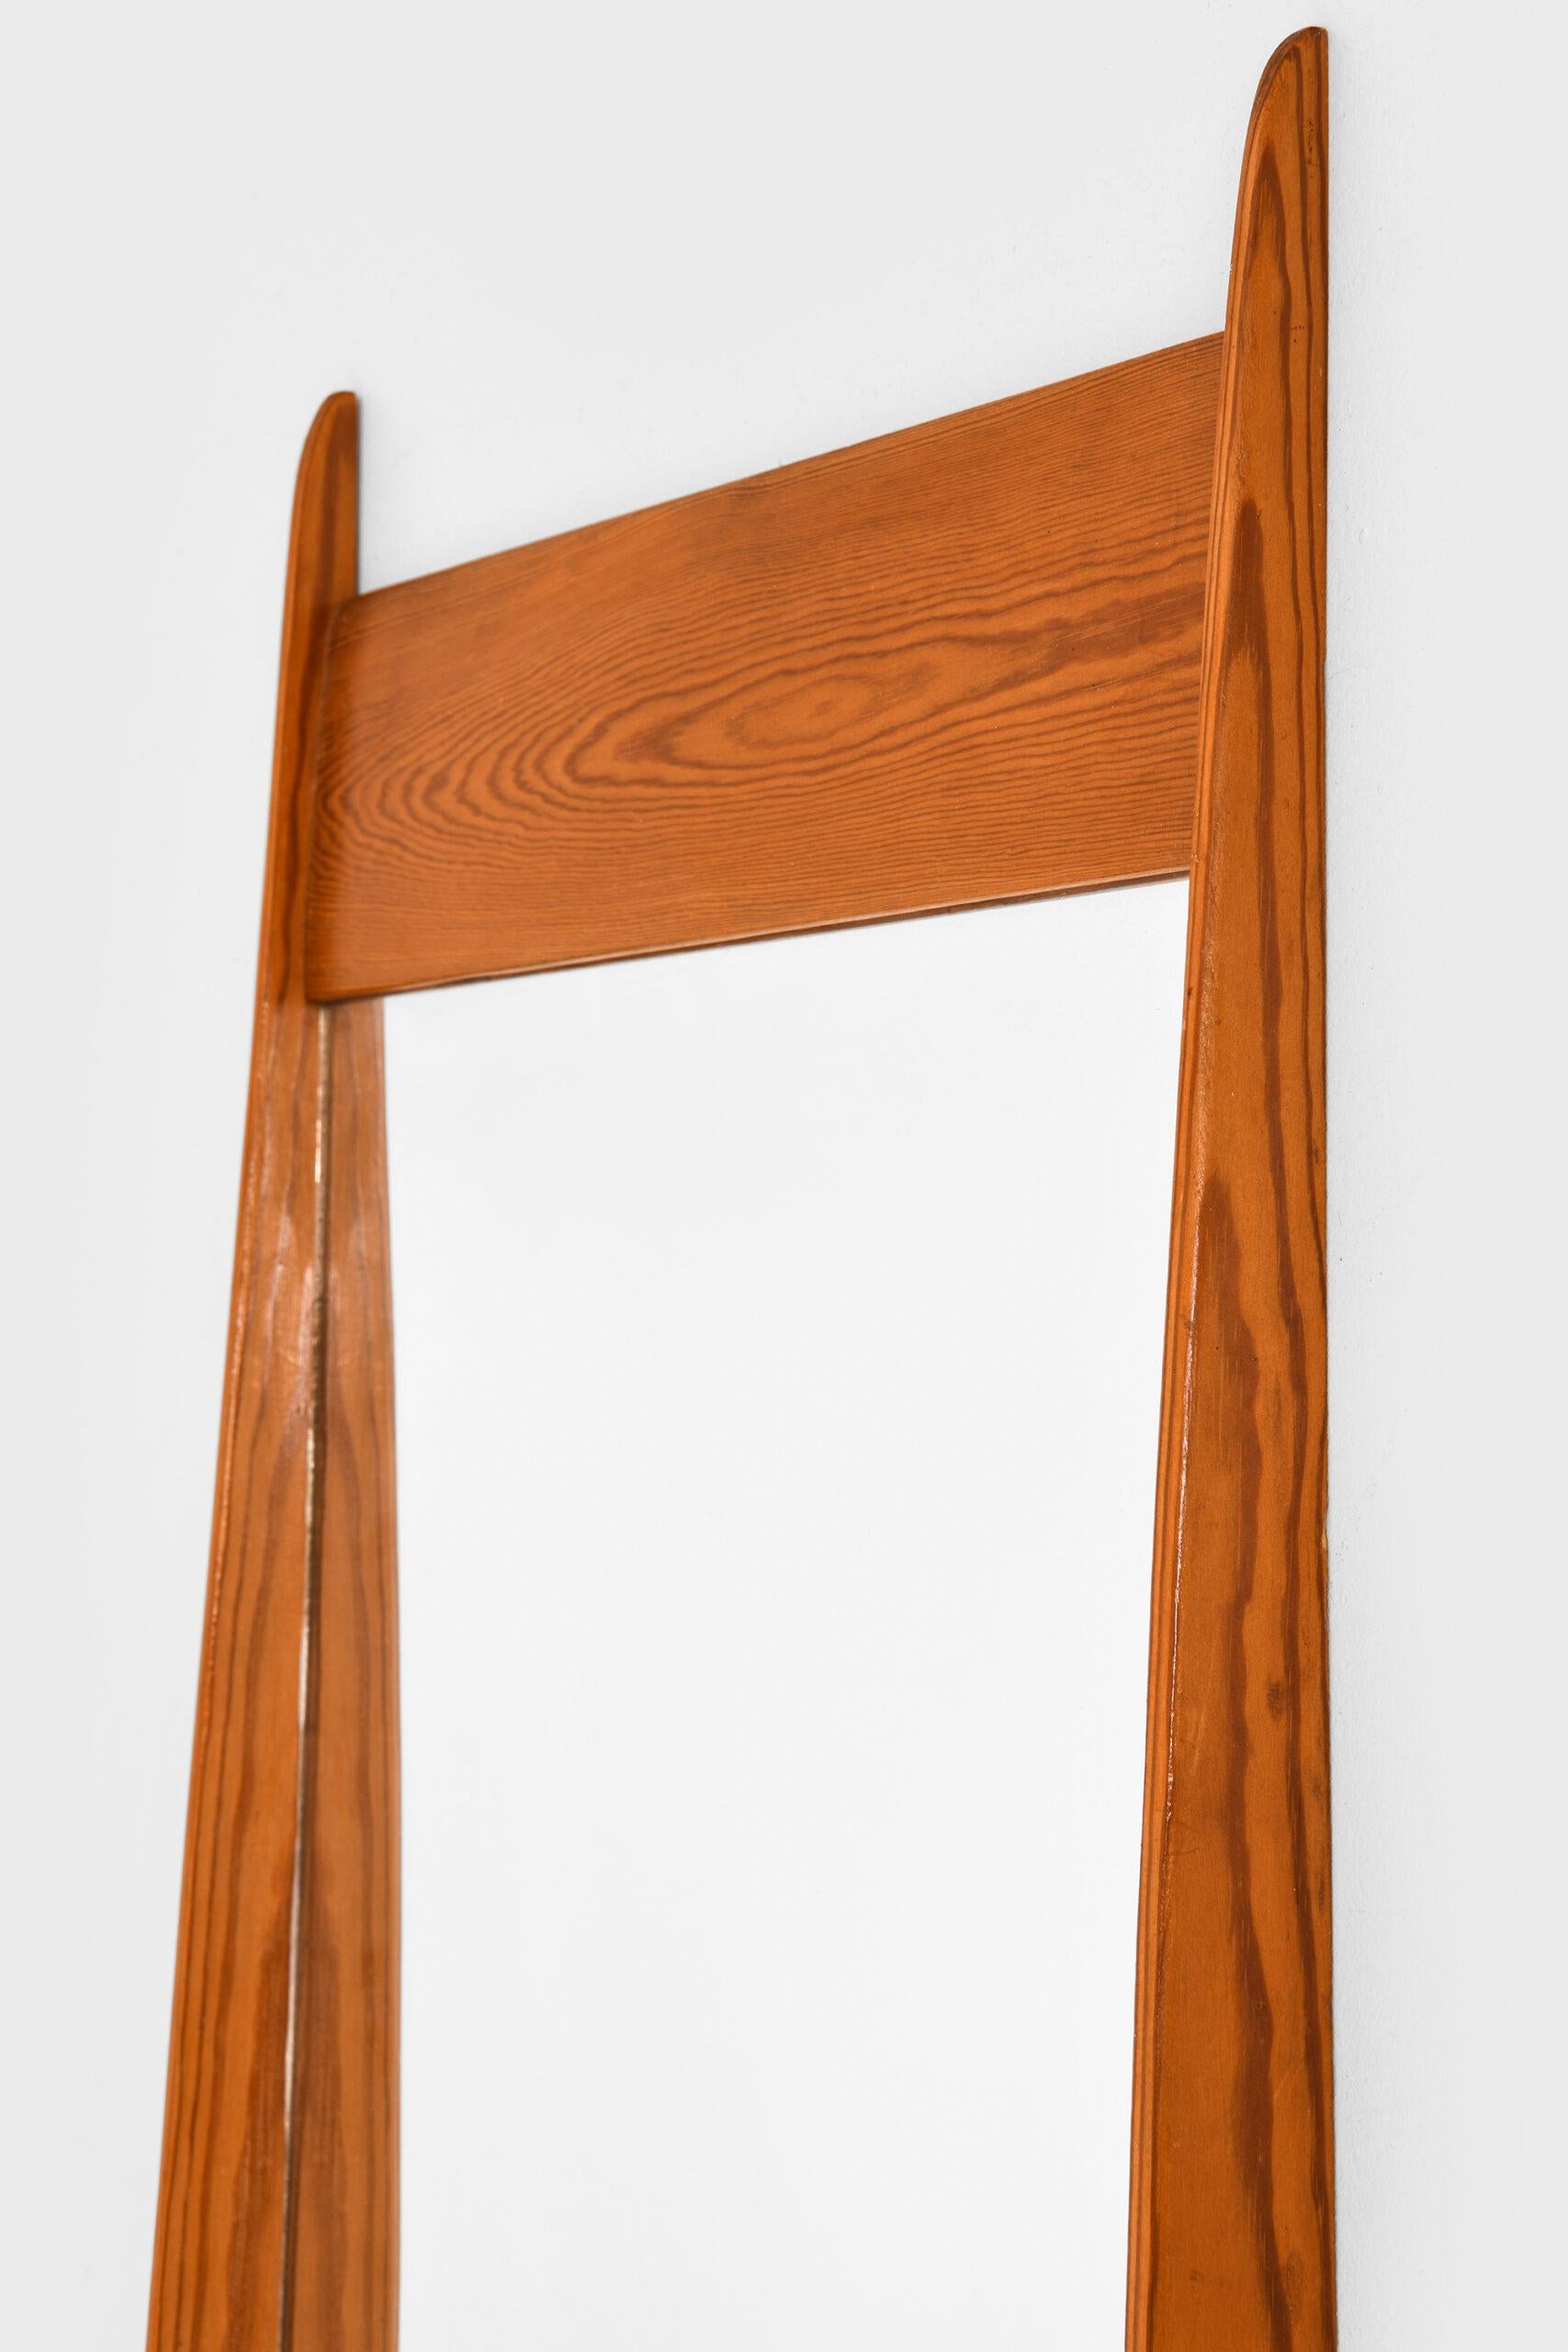 Large mirror by unknown designer. Produced in Sweden.